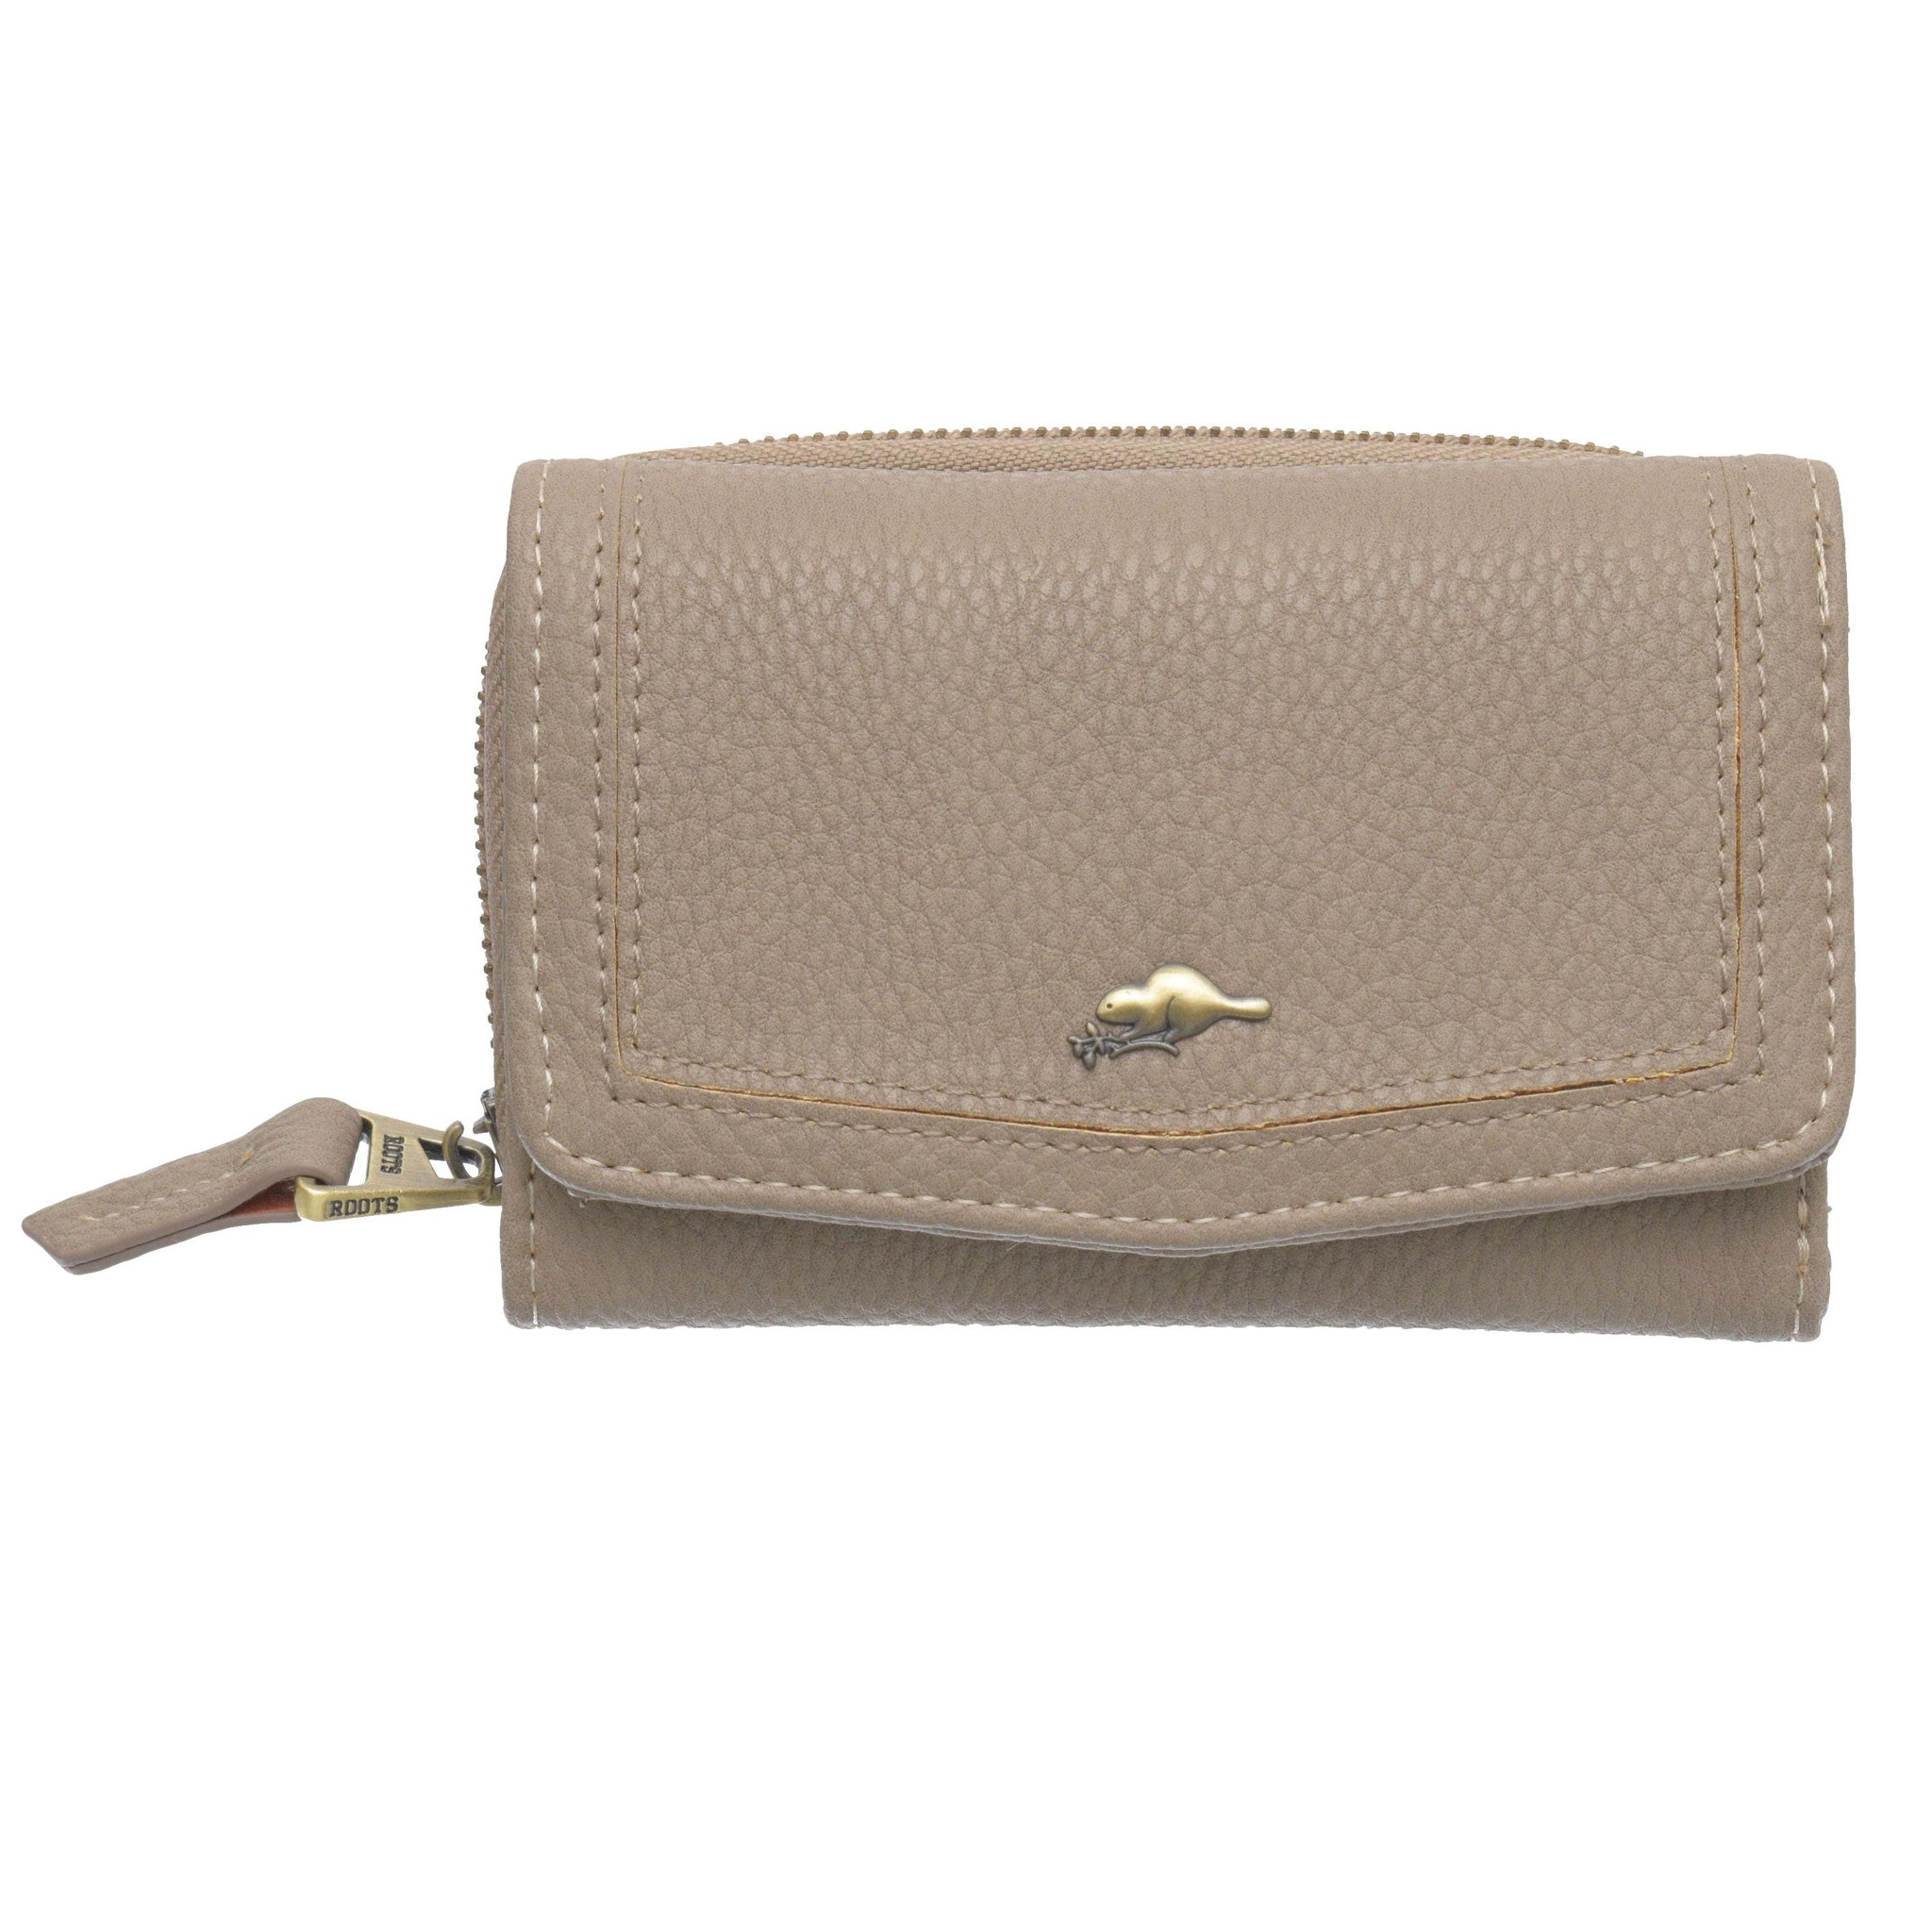 ROOTS LADIES TRIFOLD ZIP AROUND WALLET TAUPE